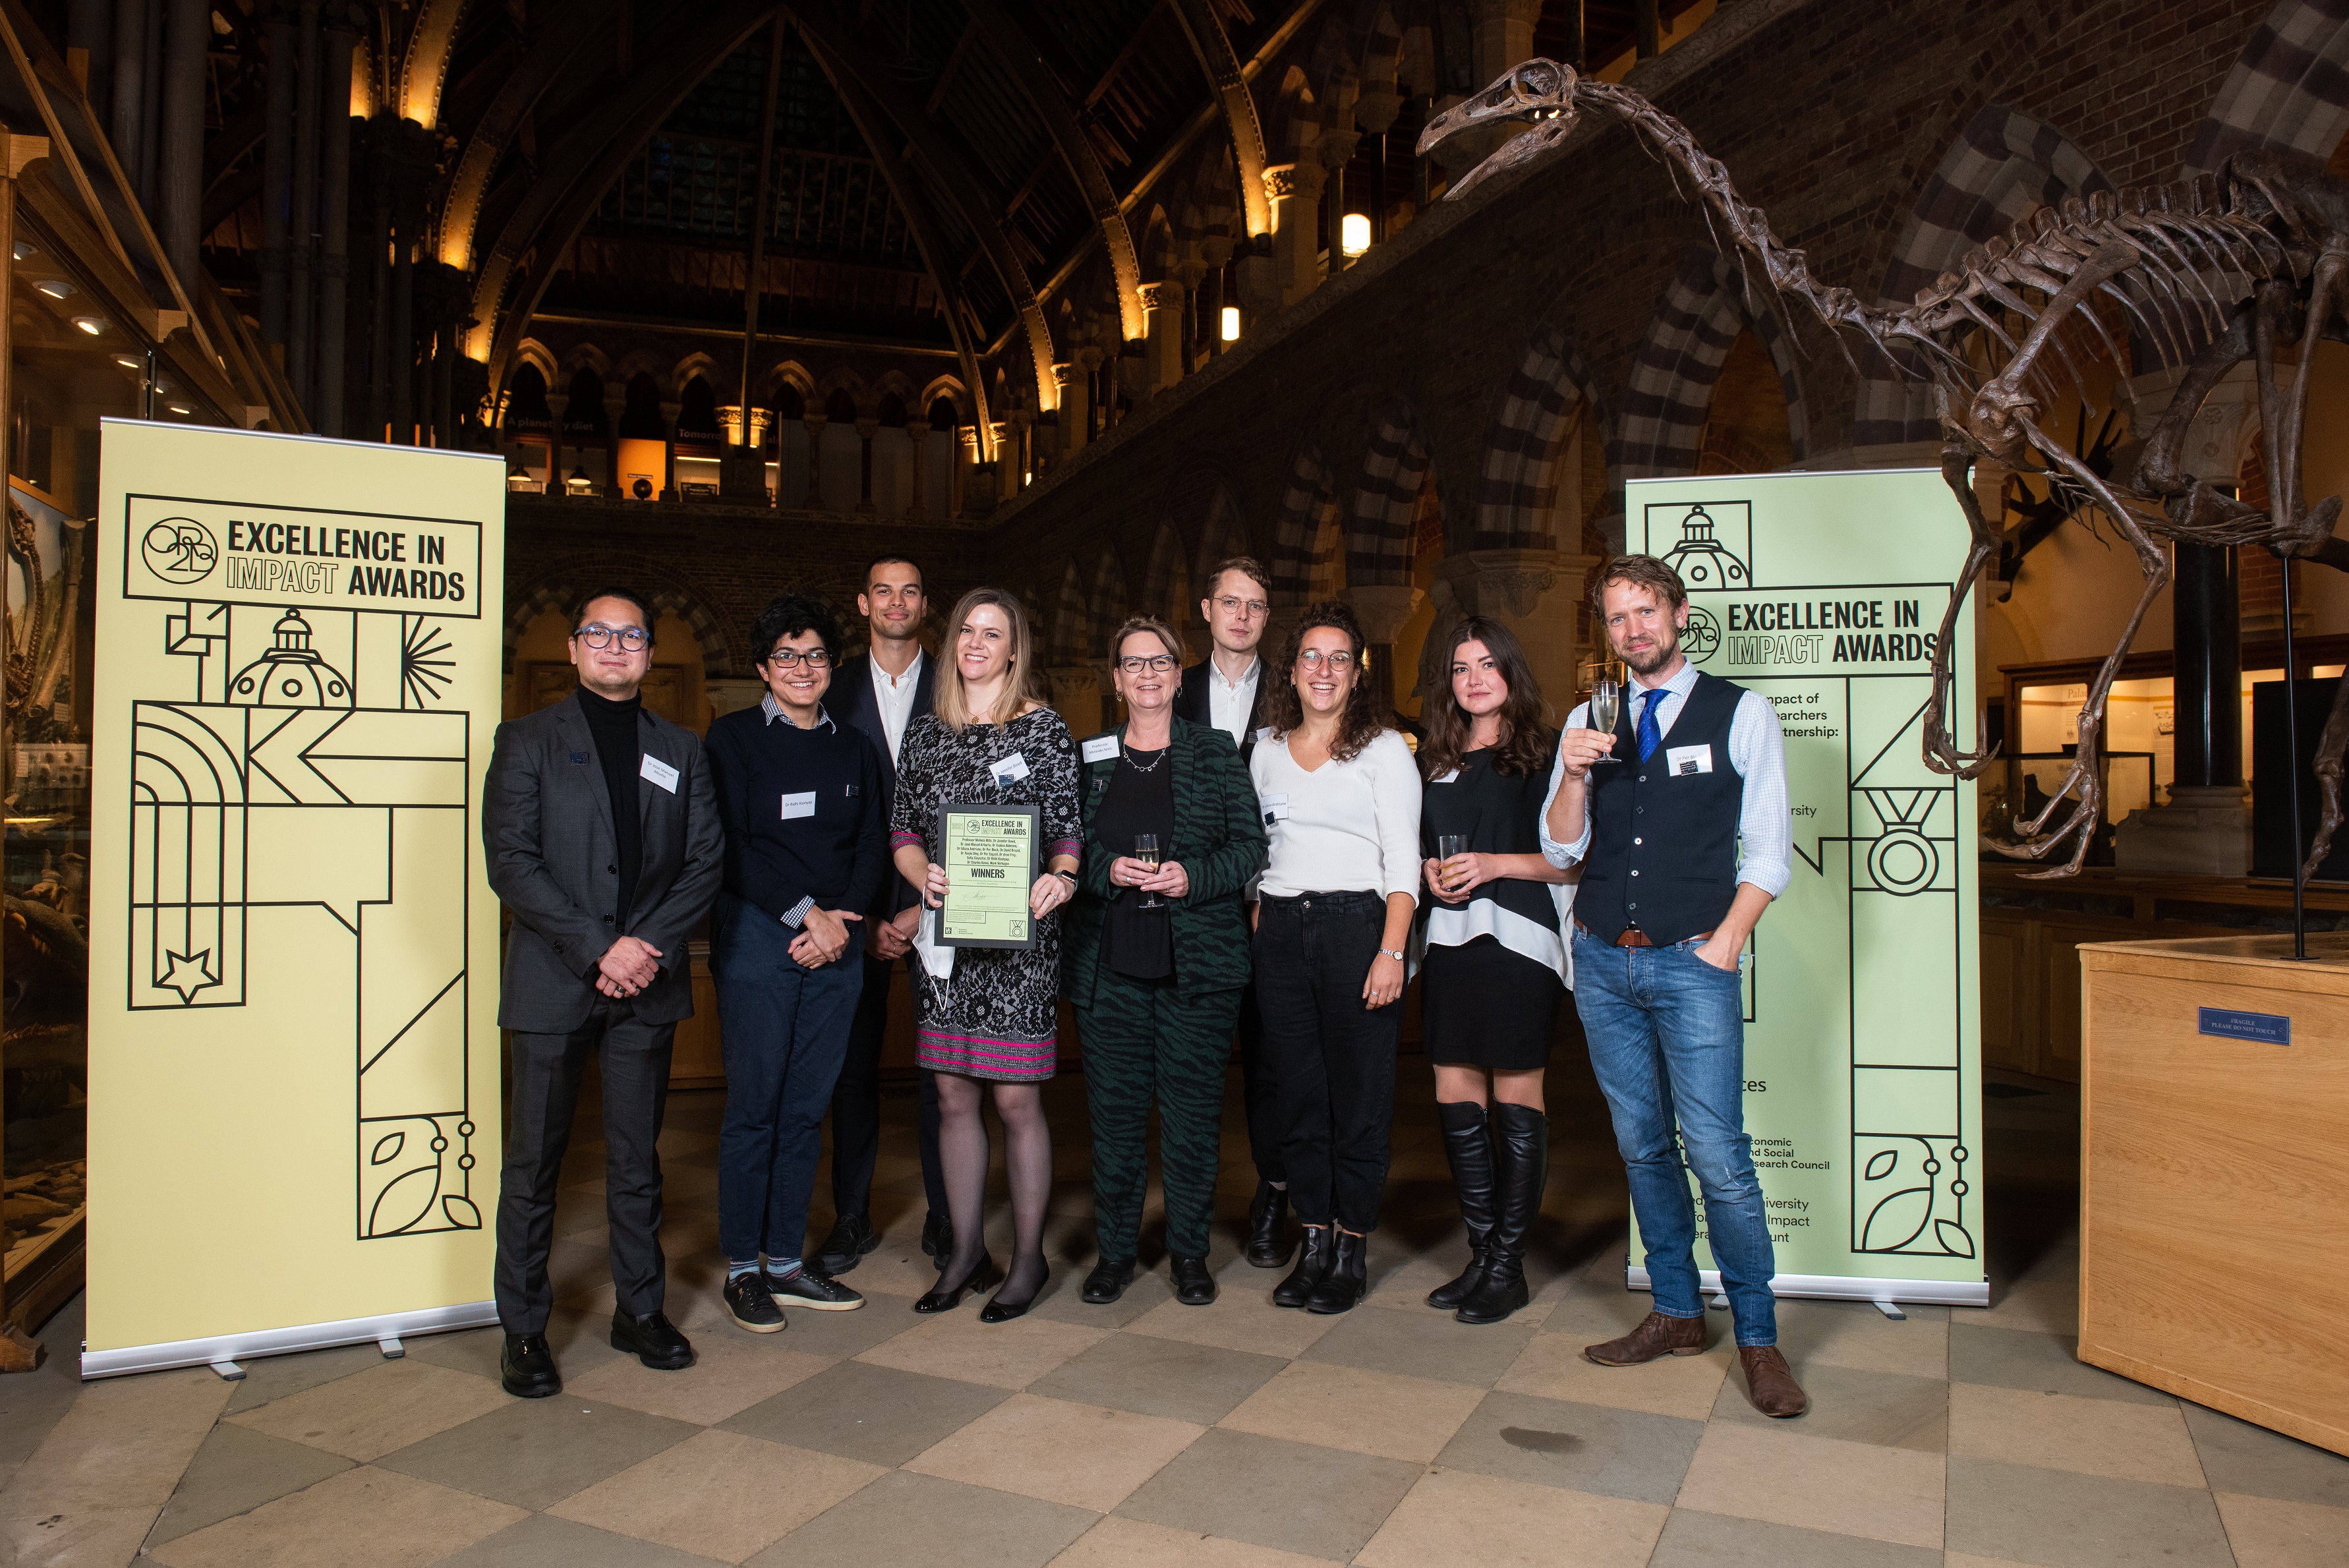 Professor Melinda Mills, Dr Jennifer Beam Dowd, and colleagues from the LCDS team smile as they hold their Impact Awards winners certificate, in front of the O2RB Excellence in Impact Awards event branding